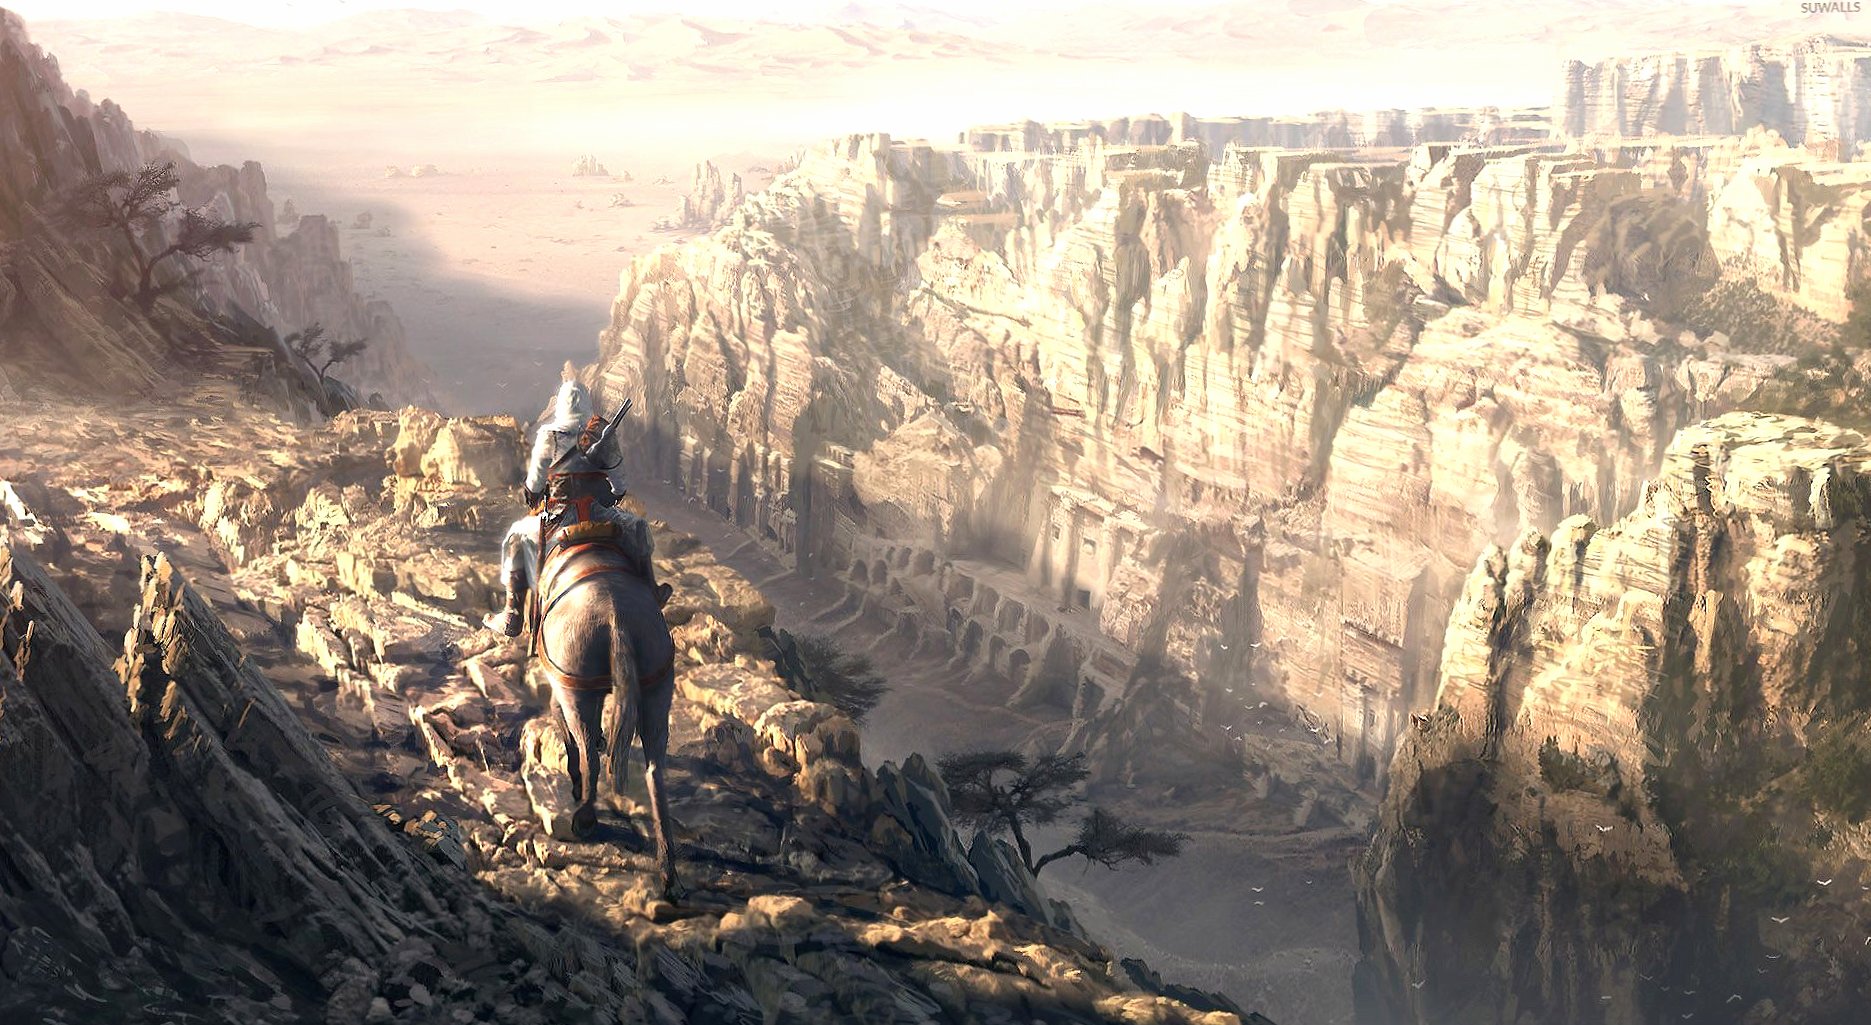 Ezio on the horse - Assasinss Creed wallpapers HD quality